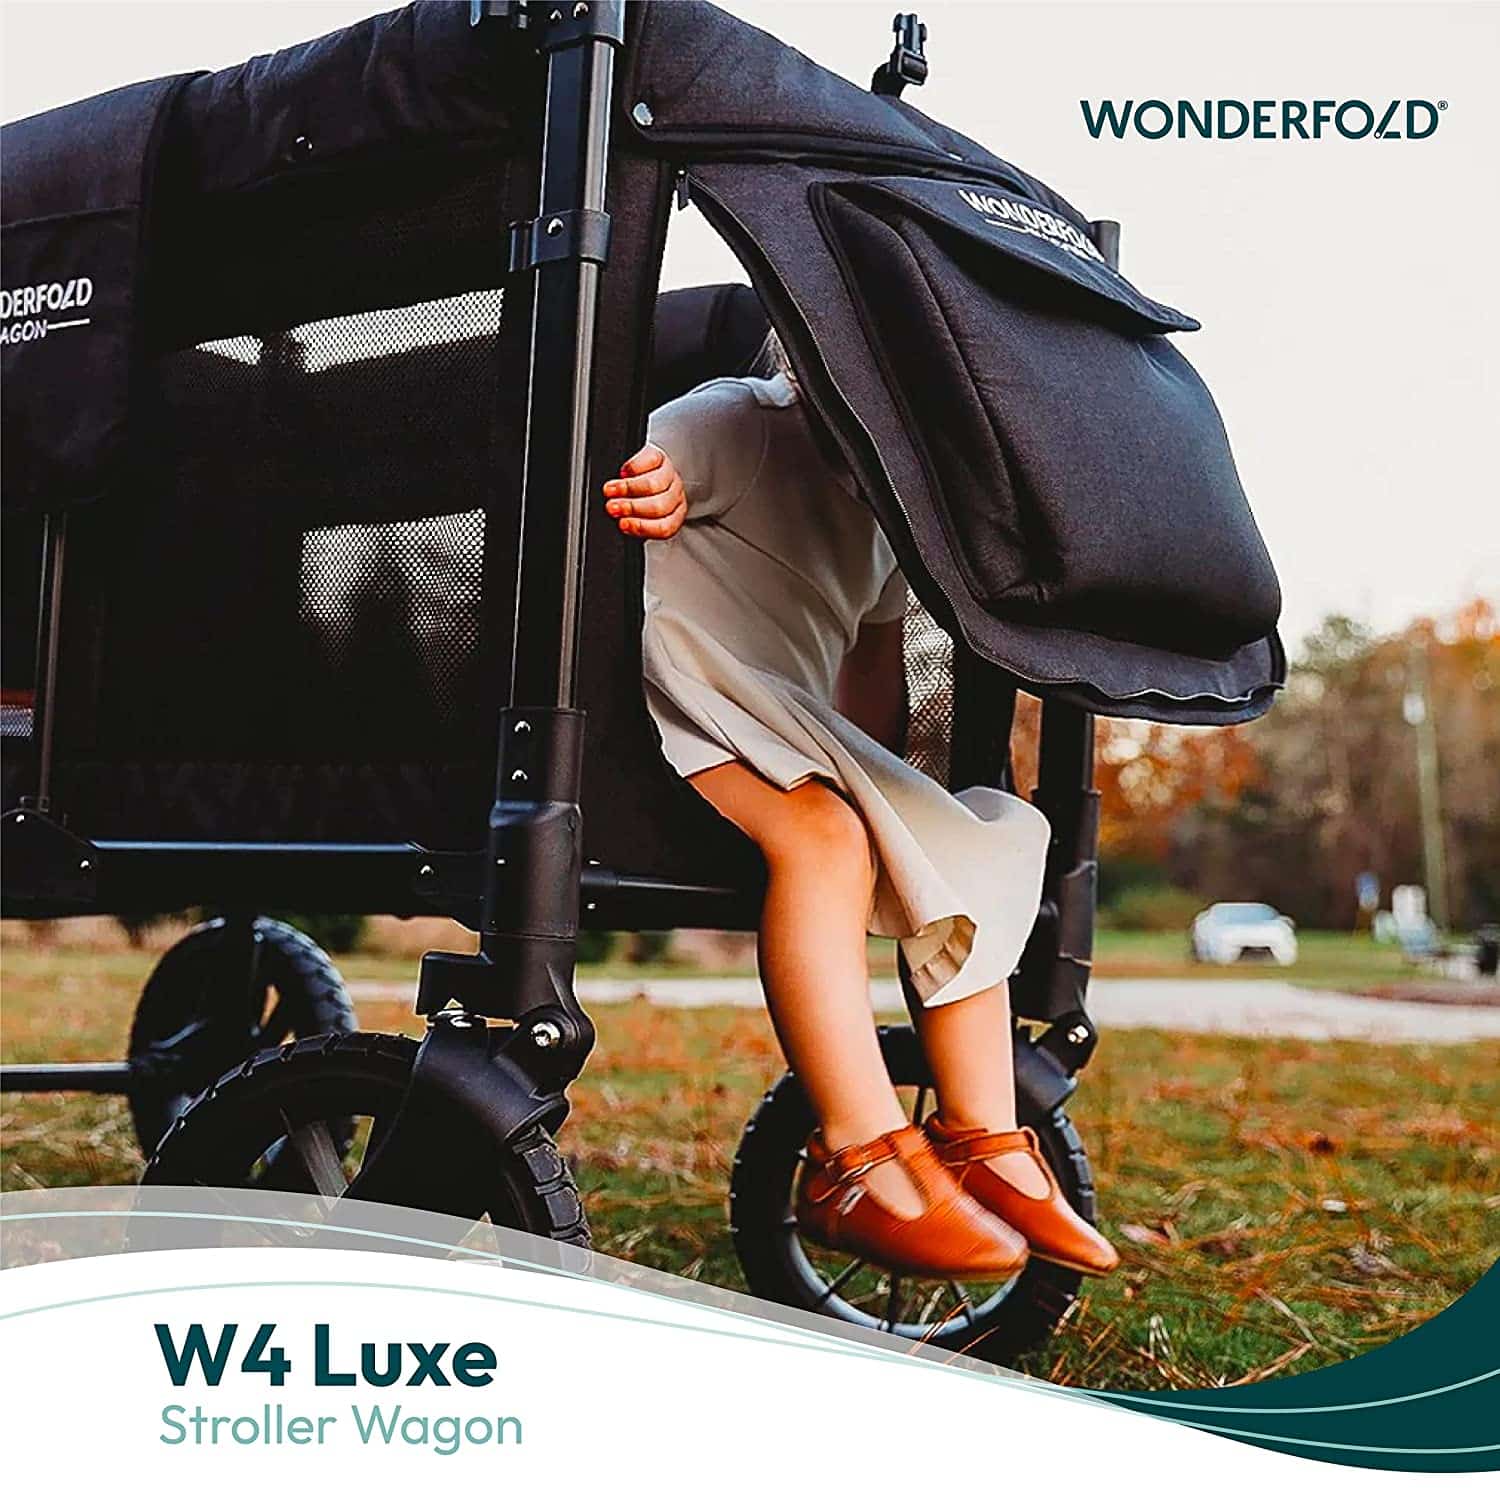 Wonderfold Wagon: A Review of its Design, Features, and Functionality  – February 2023